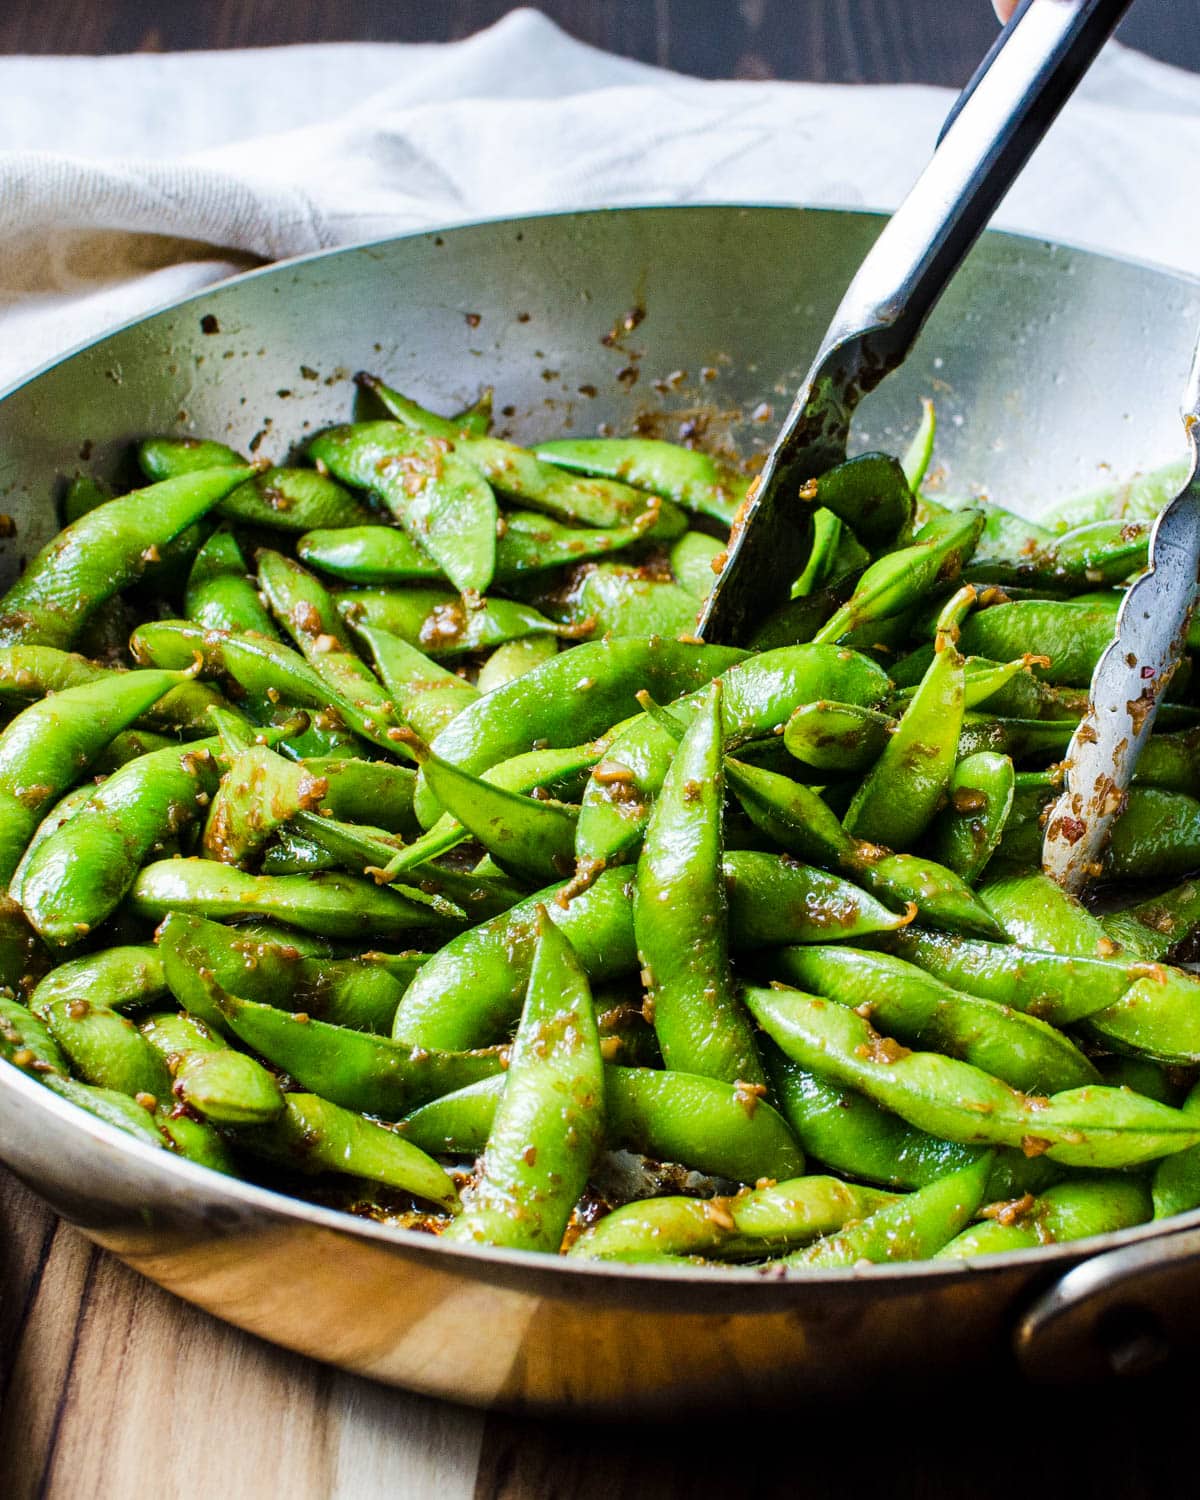 Tossing the edamame with the spicy dressing using a pair of tongs.